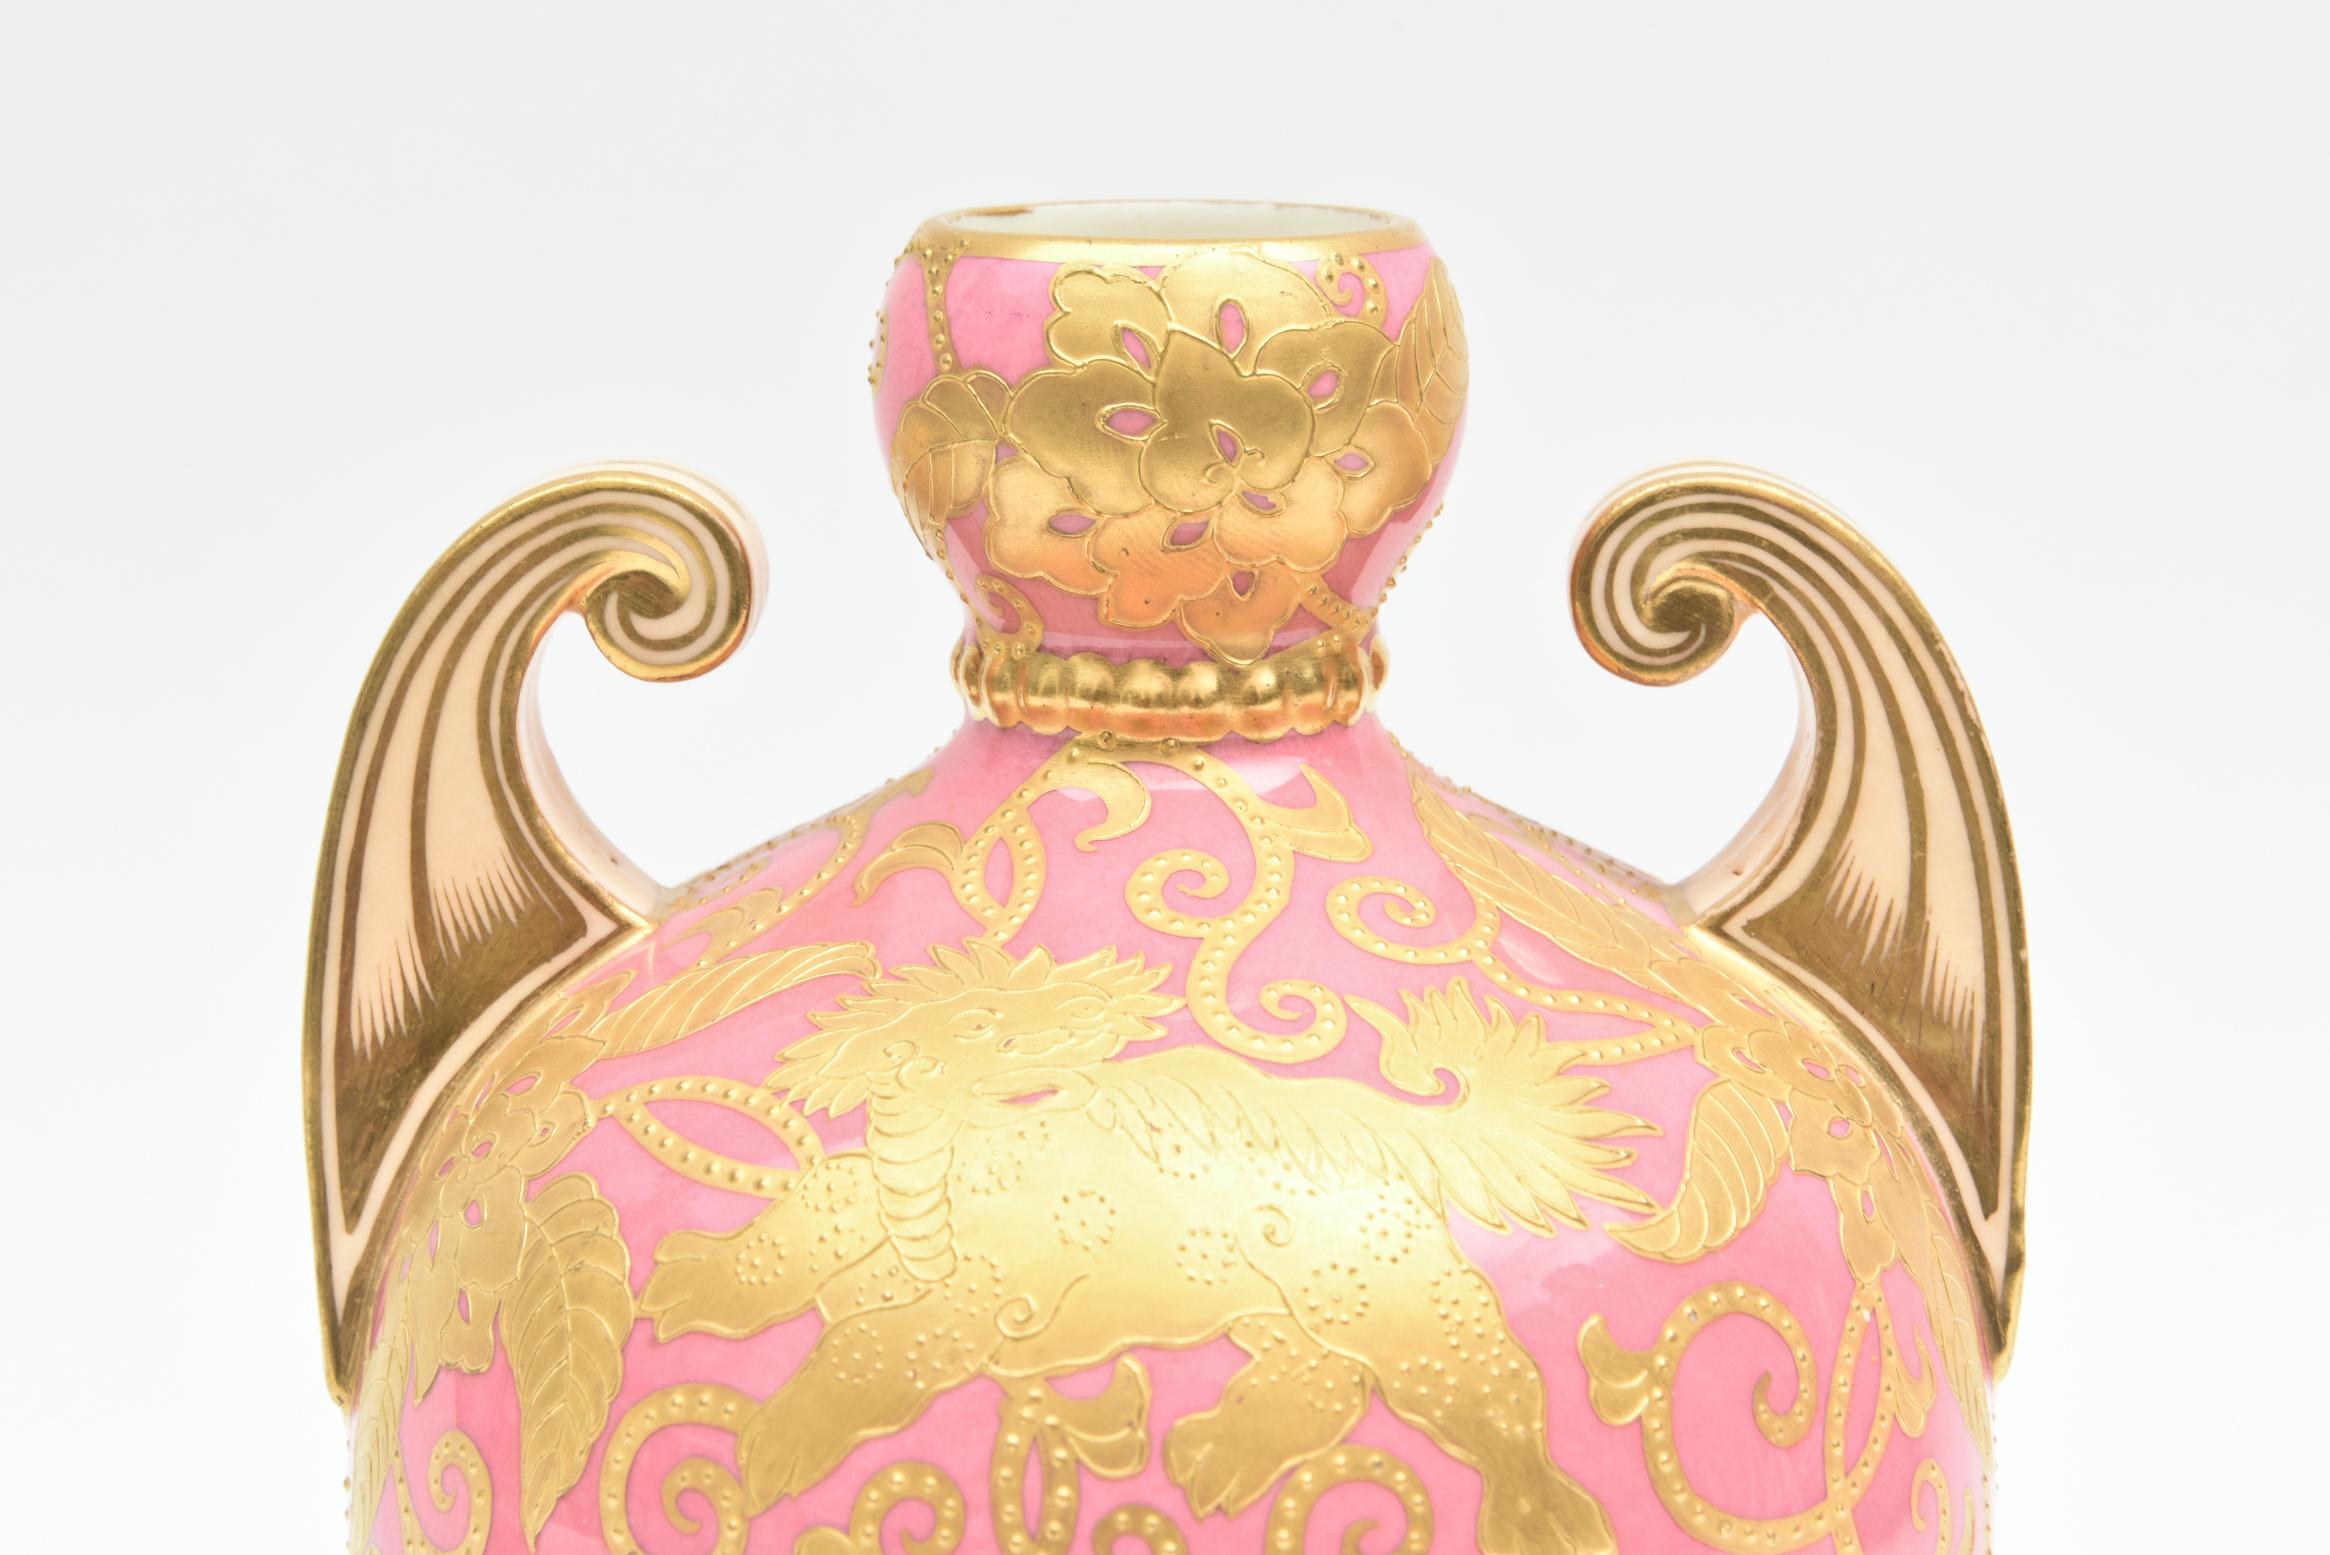 Chinoiserie Pink & Gold Encrusted Vase, Foo Dog Design with Elaborate Handles